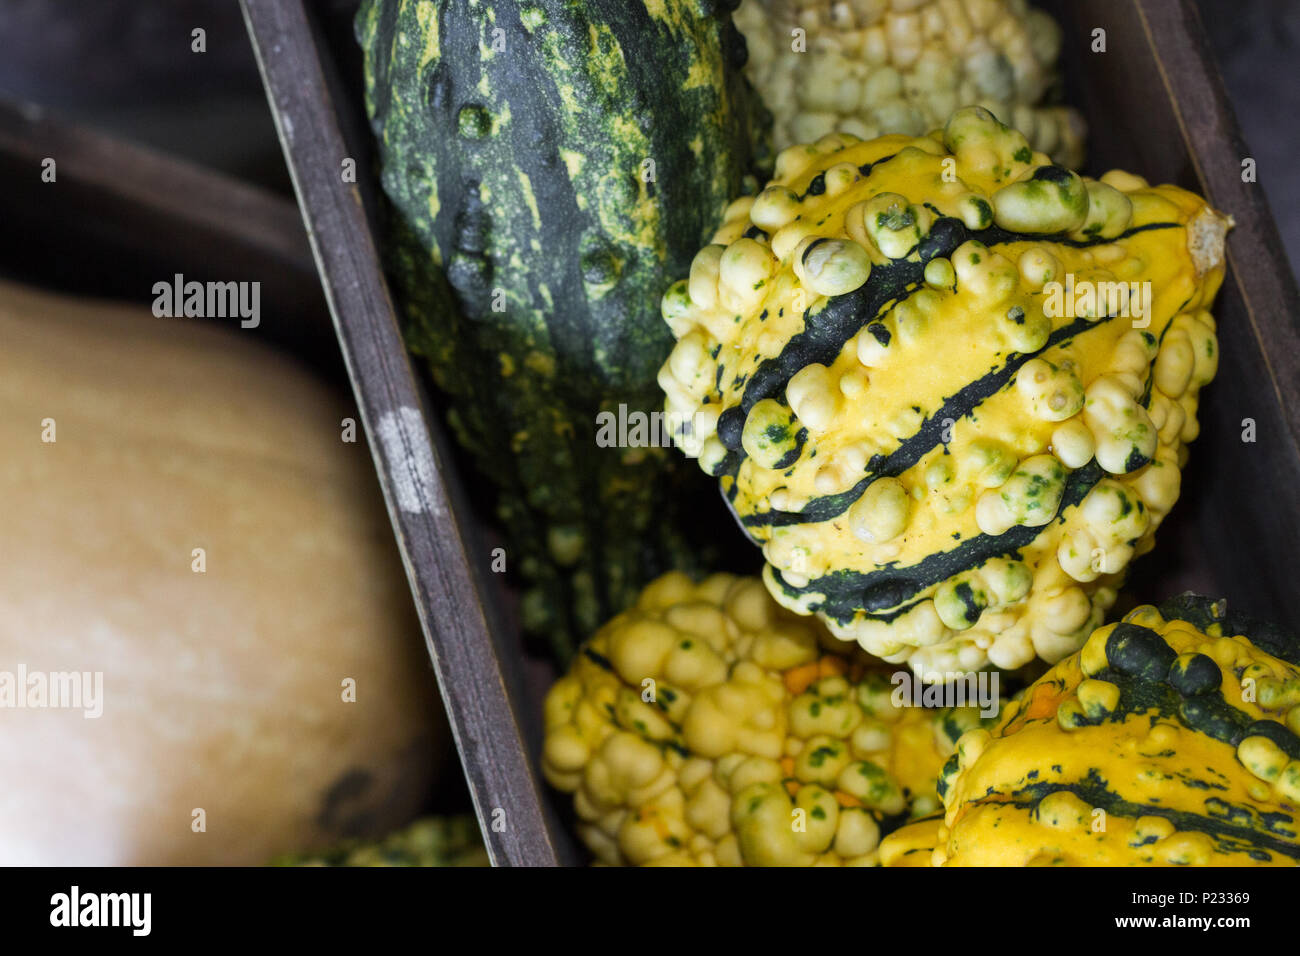 Close up detail of Butternut and Acorn squash in a rustic wooden crate. Stock Photo